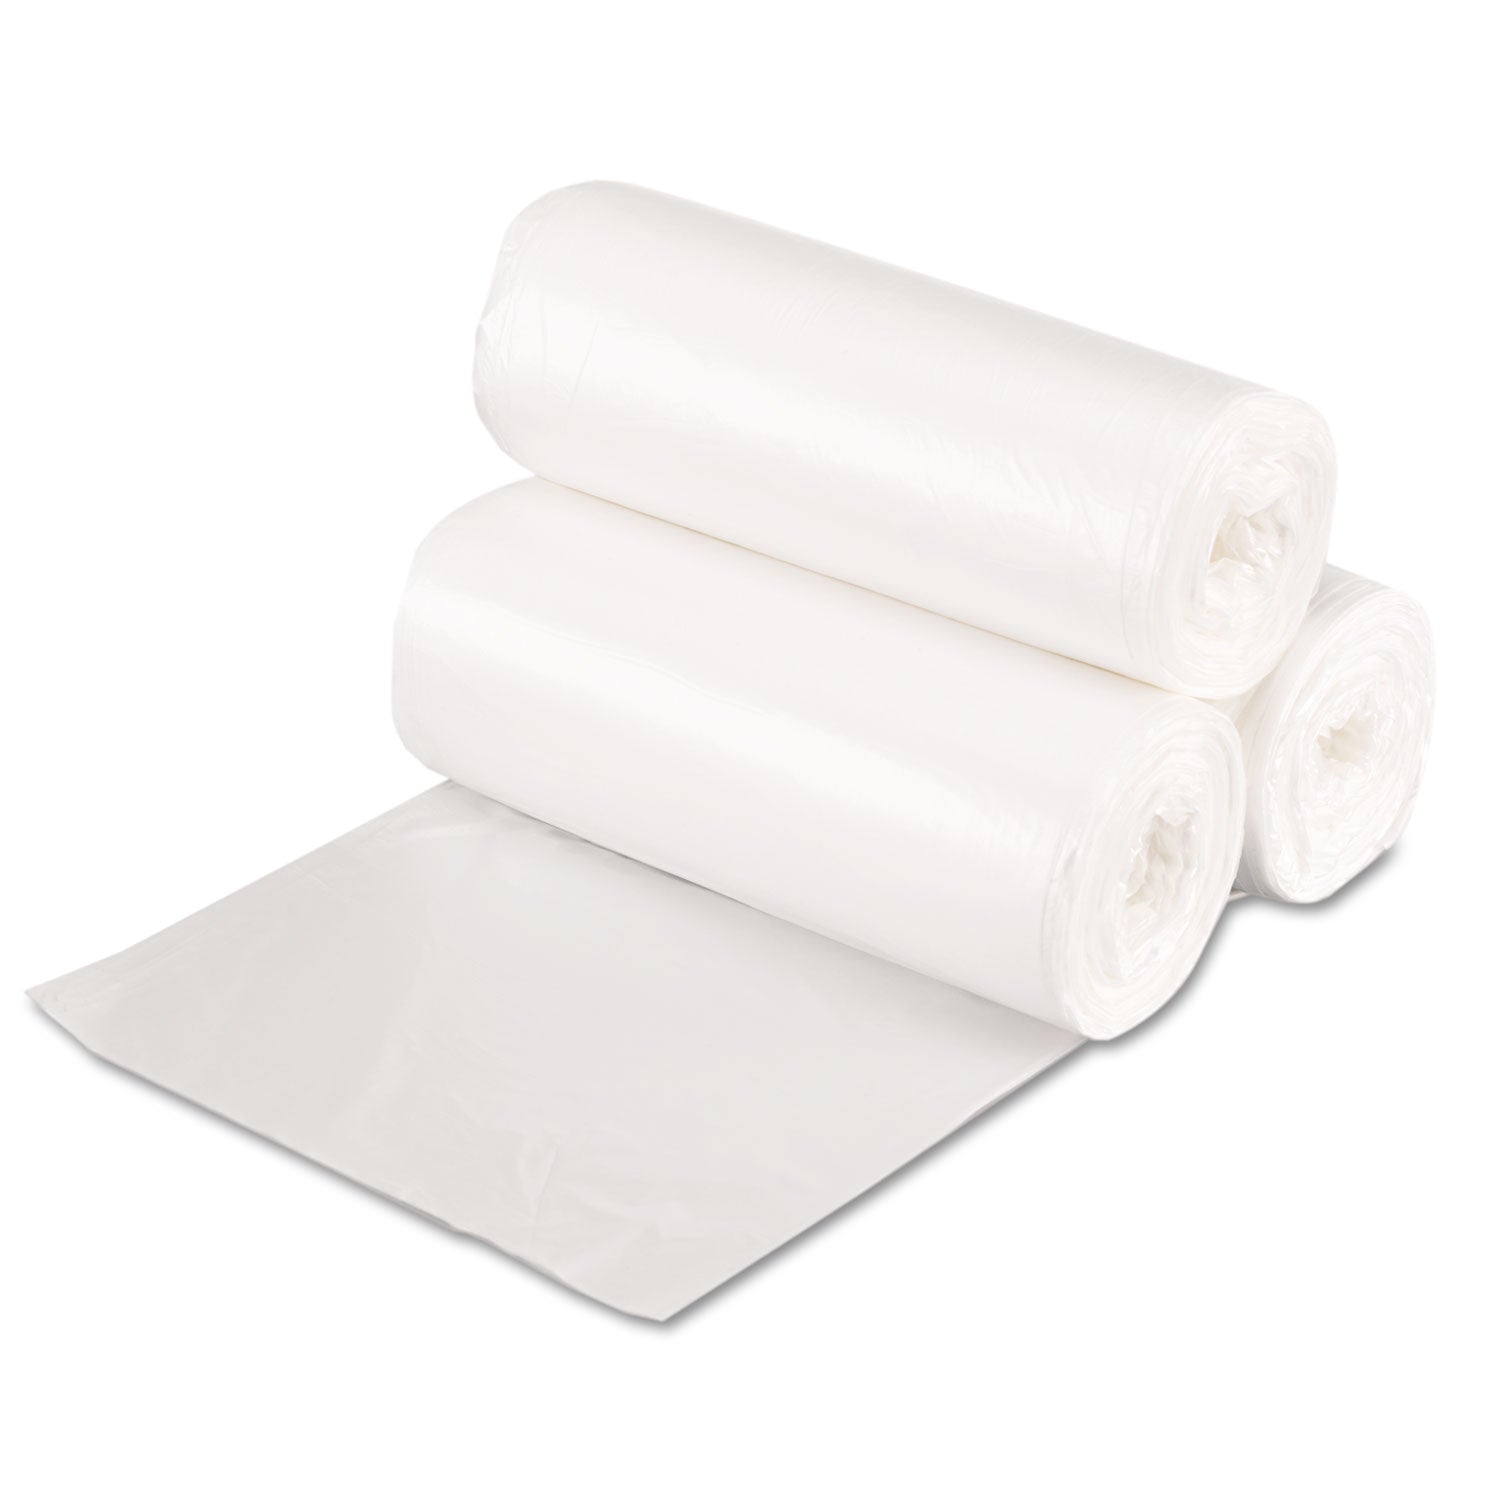 high-density-can-liners-16-gal-7-mic-24-x-31-natural-50-bags-roll-20-rolls-carton_bwk243108 - 1